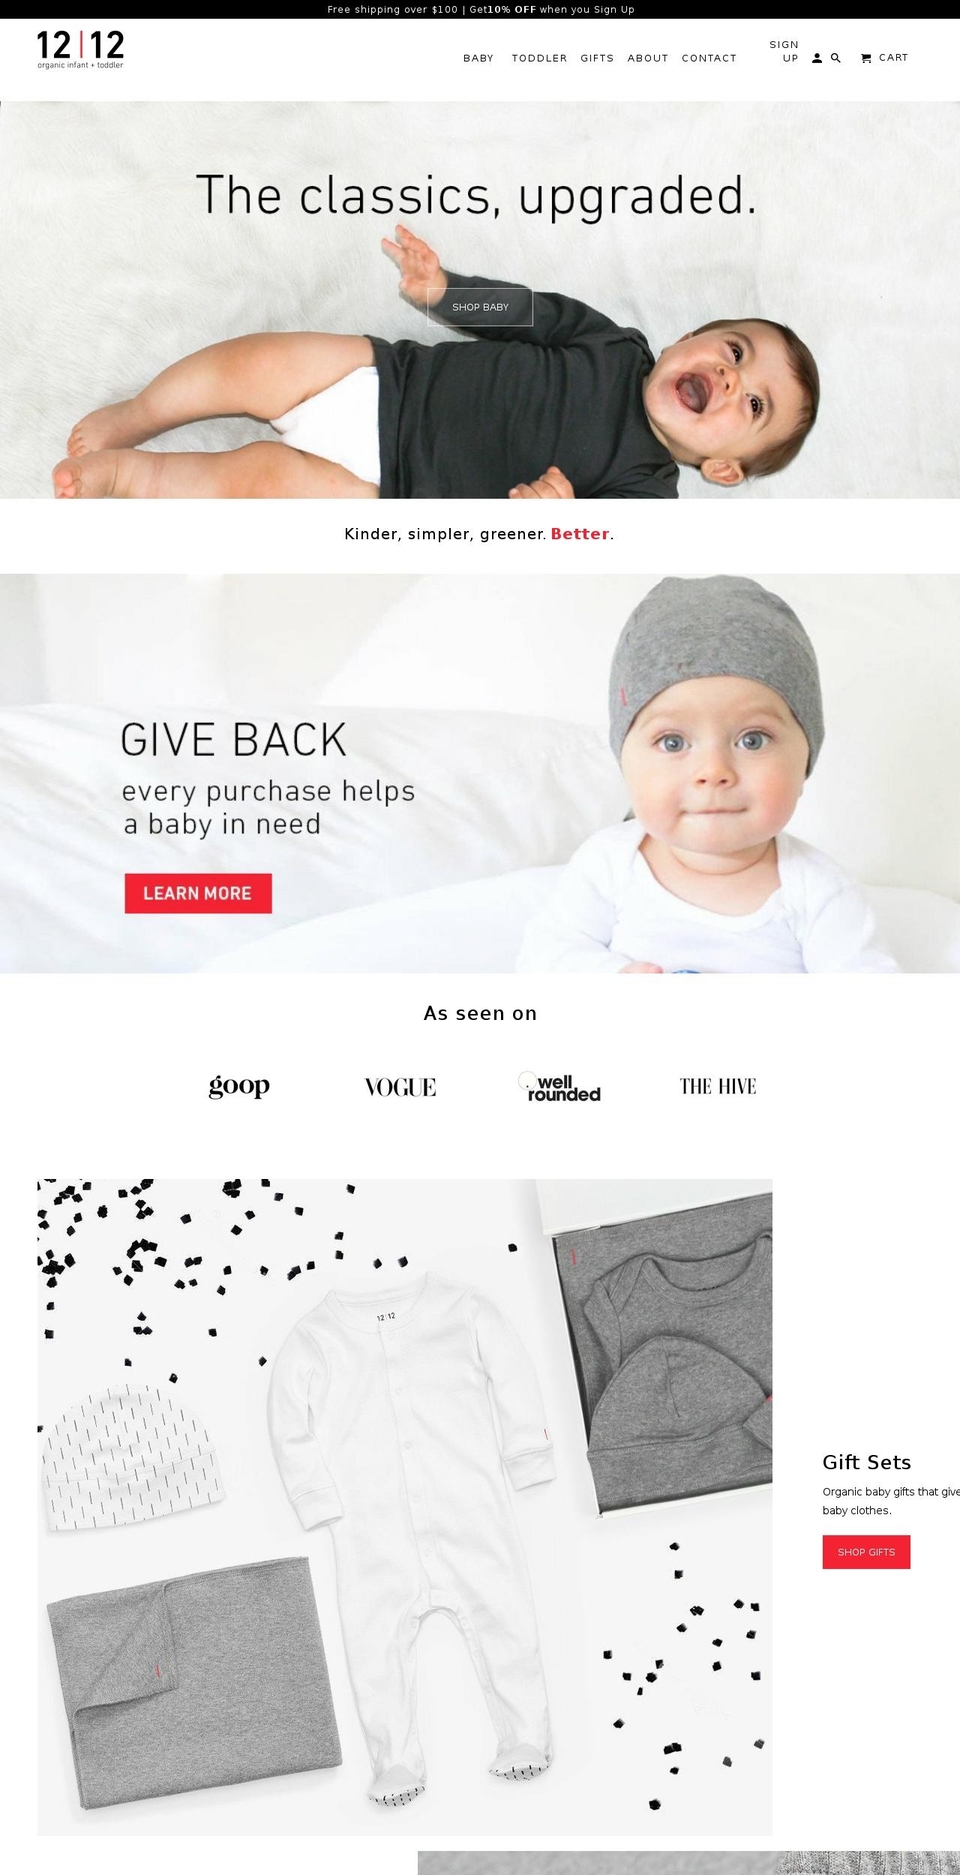 Redesign Shopify theme site example 1212getgive.com